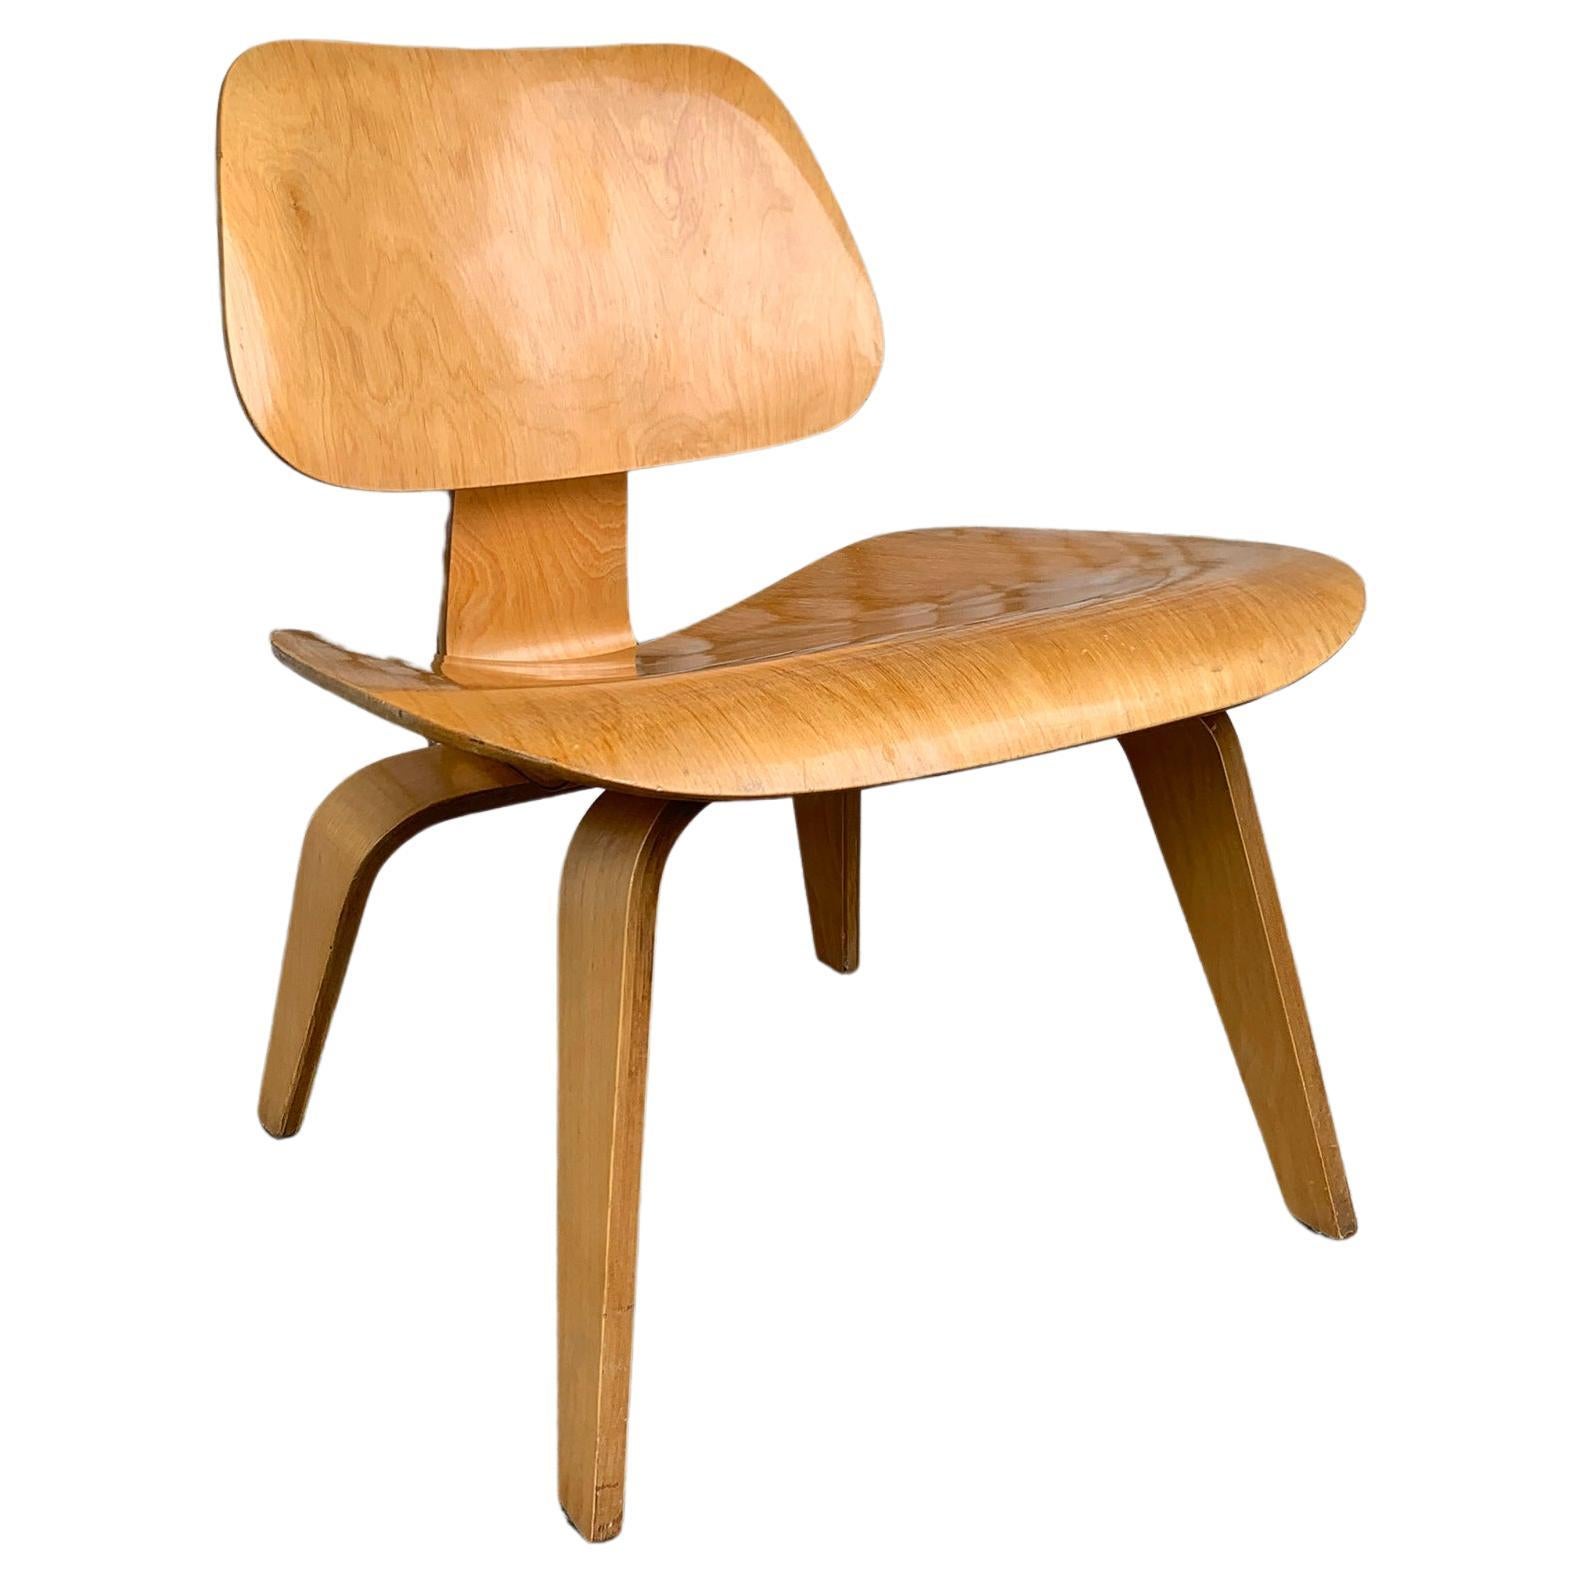 Early LCW Lounge Chair in Birch by Charles & Ray Eames, Herman Miller, 1950s